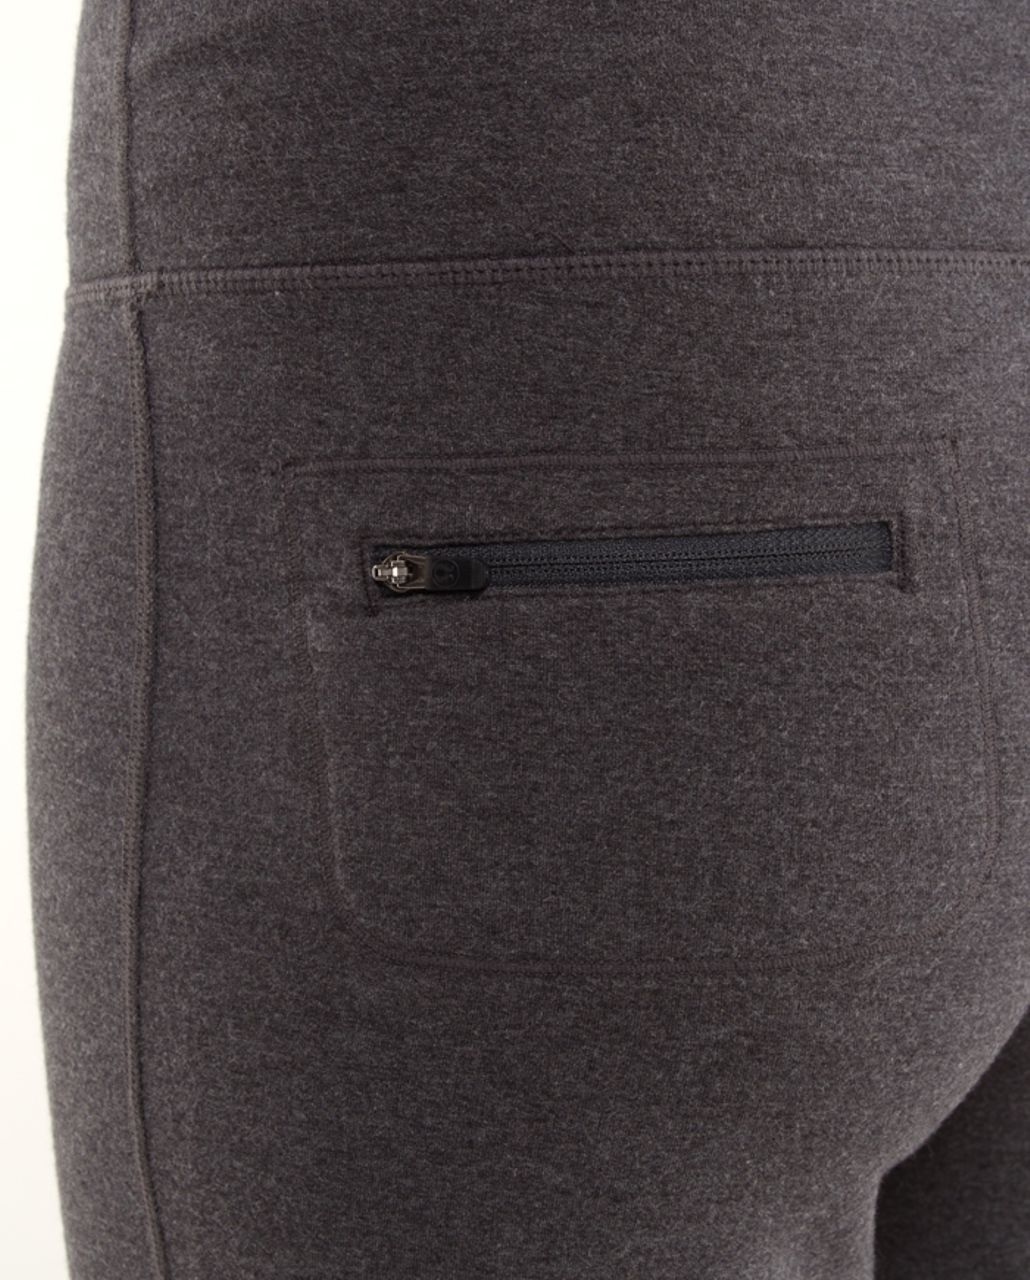 Lululemon Relaxed Fit Crop *Modal - Heathered Black